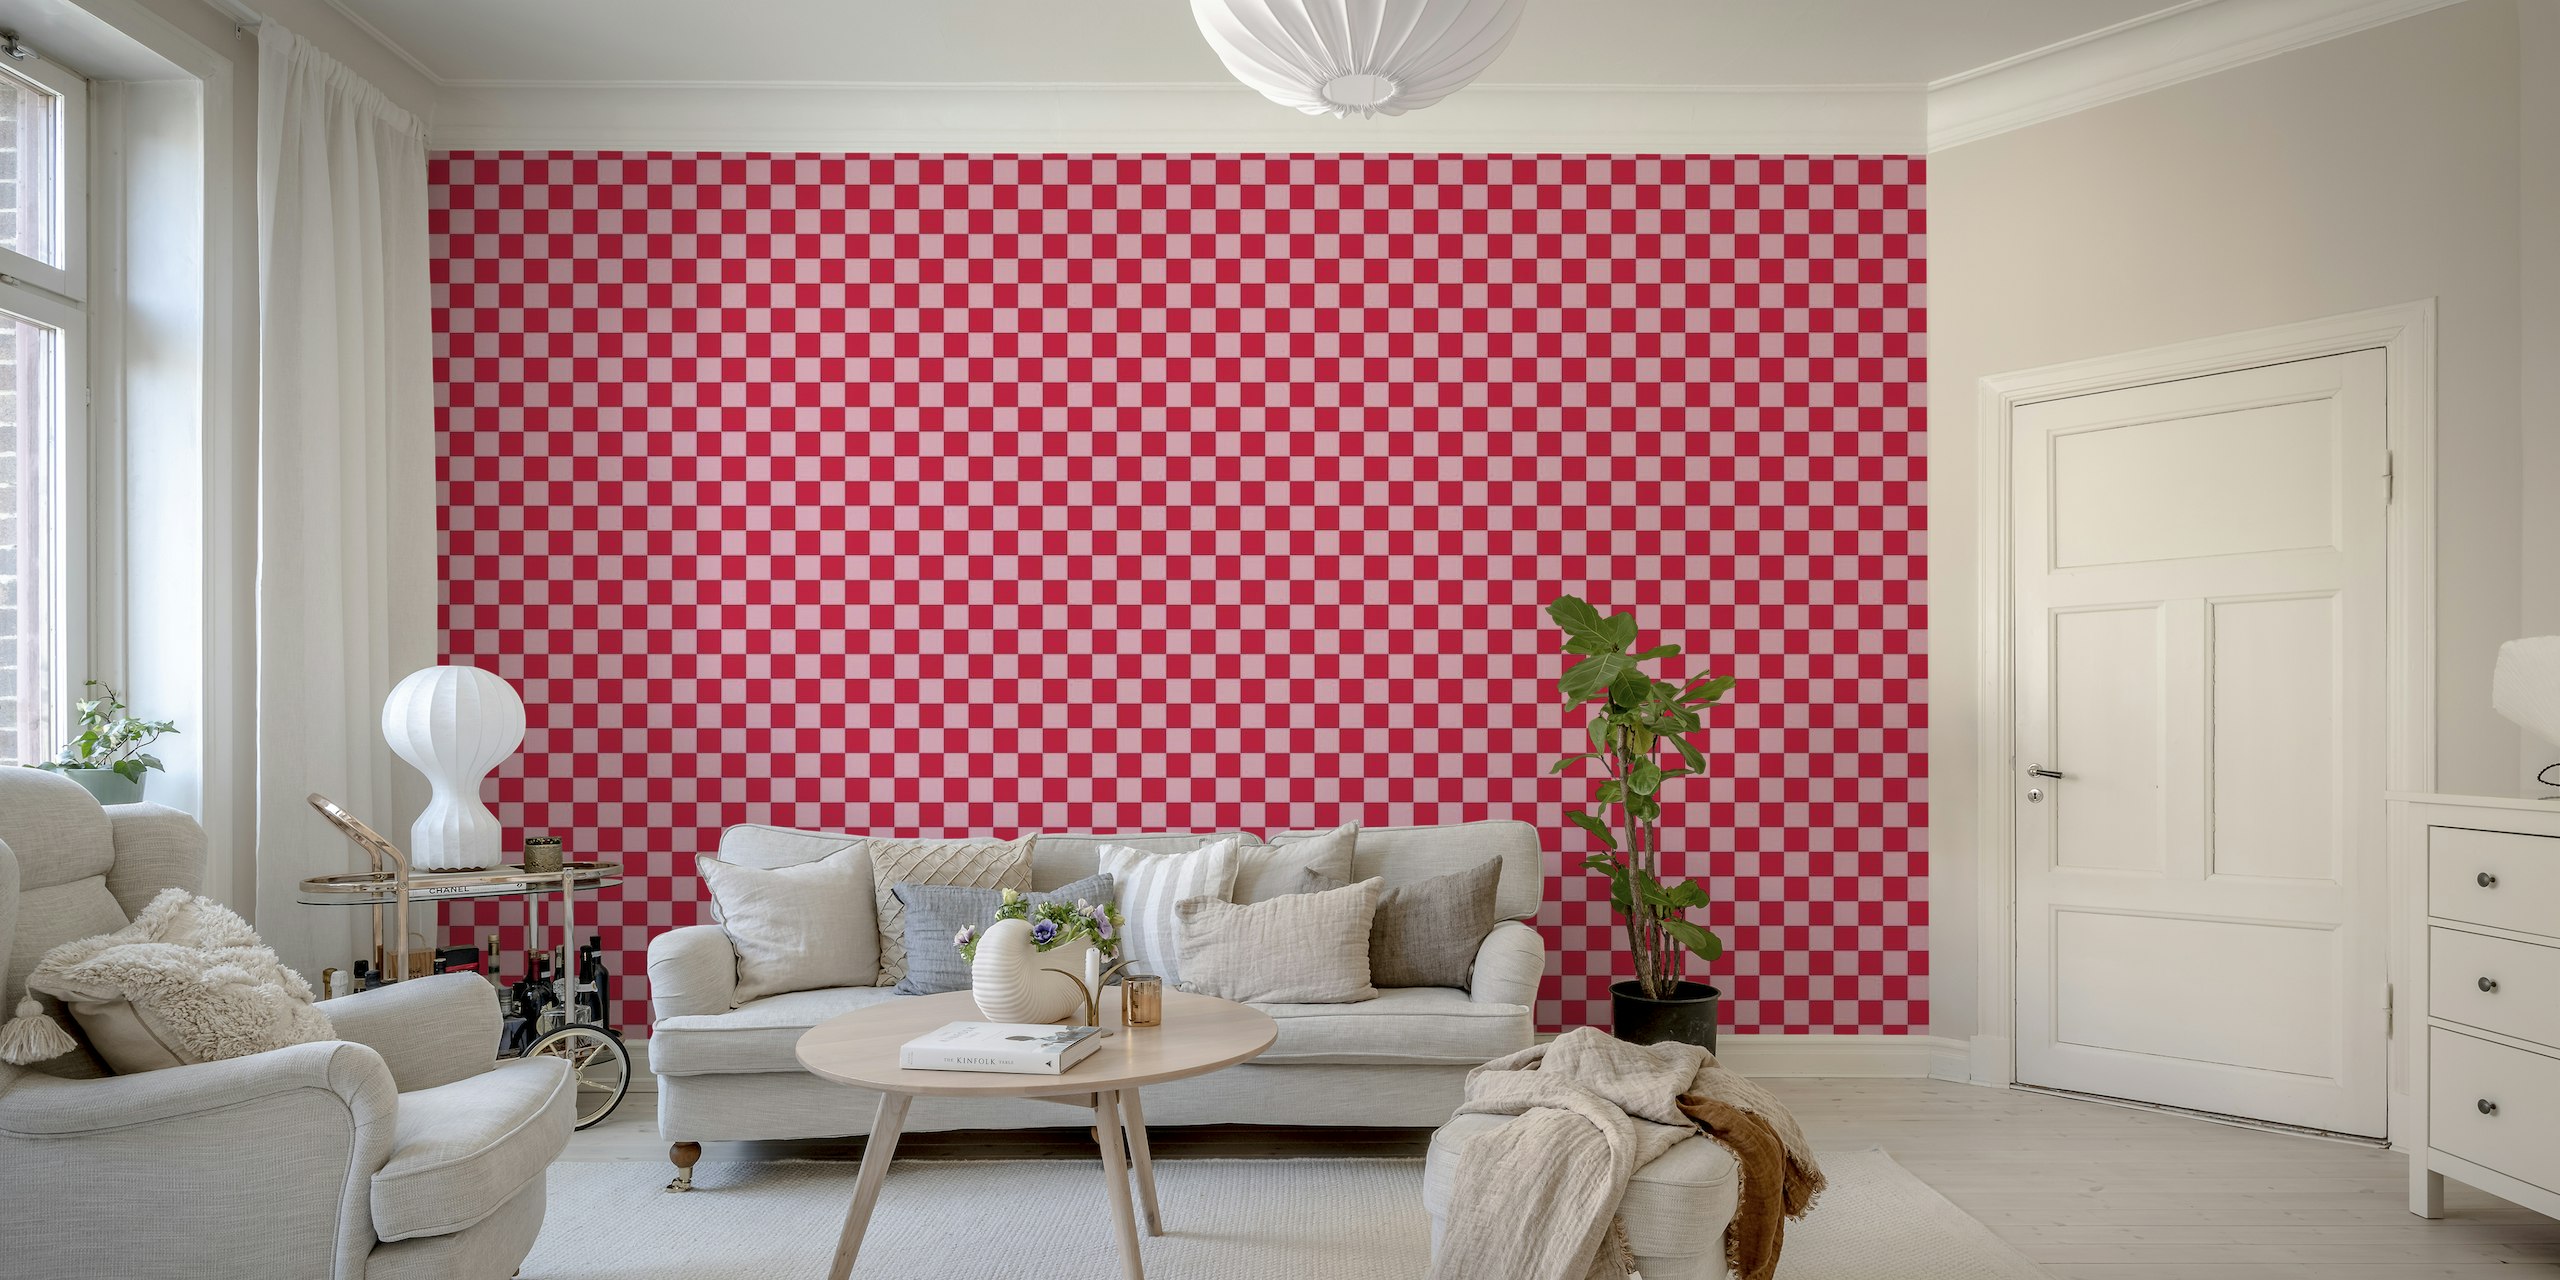 Checkerboard - Pink and Red papel de parede